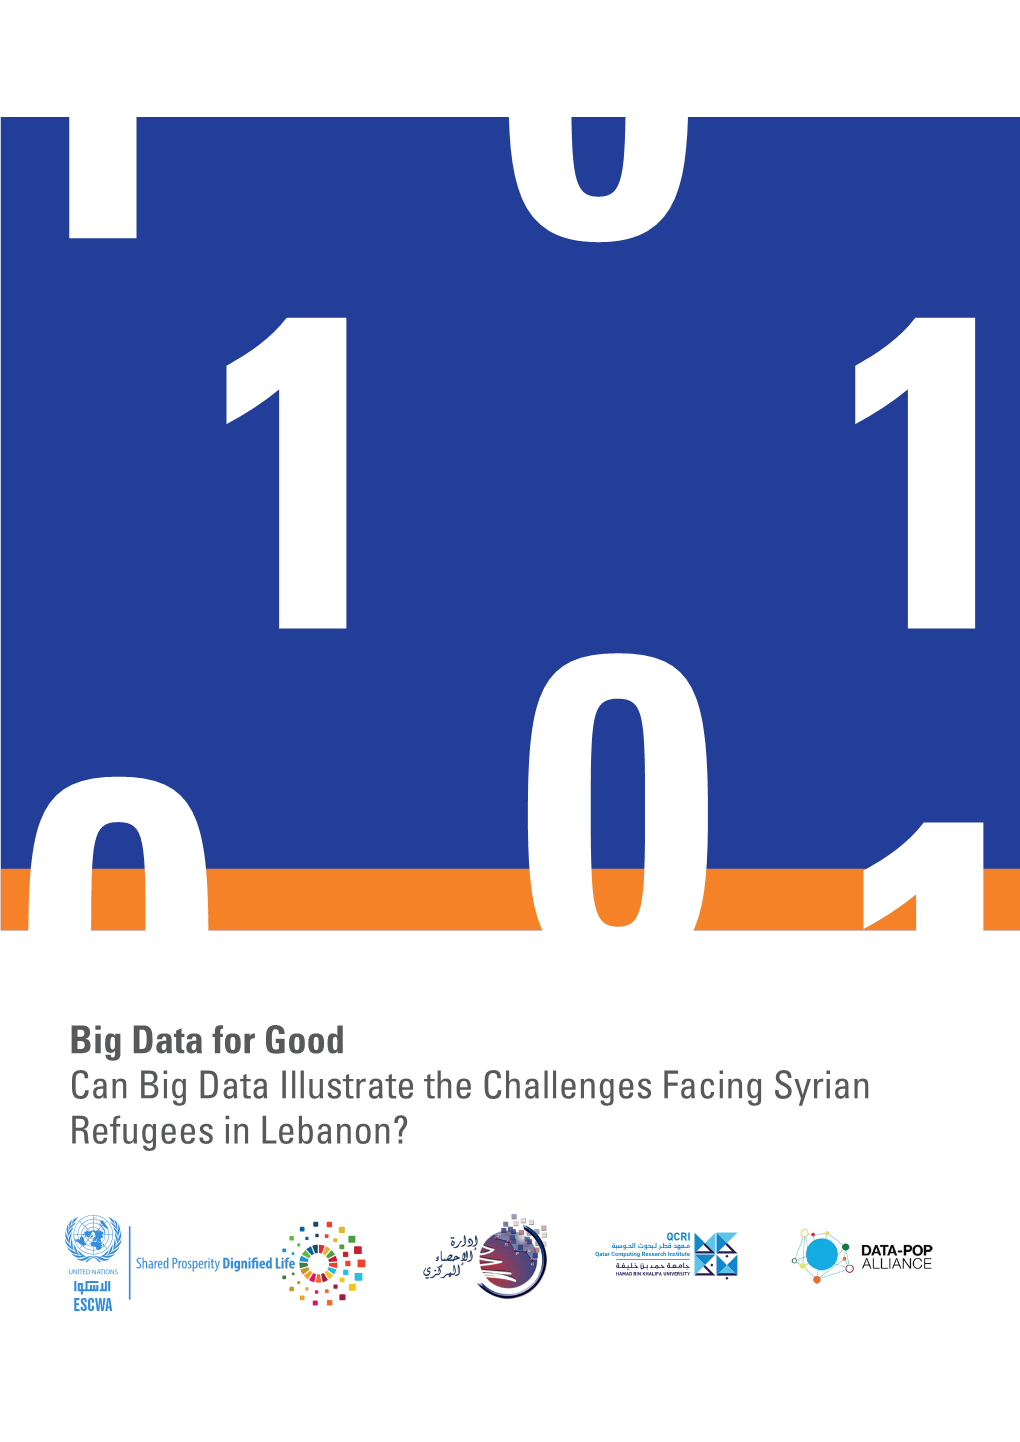 Big Data for Good Can Big Data Illustrate the Challenges Facing Syrian Refugees in Lebanon? © 2020 United Nations All Rights Reserved Worldwide